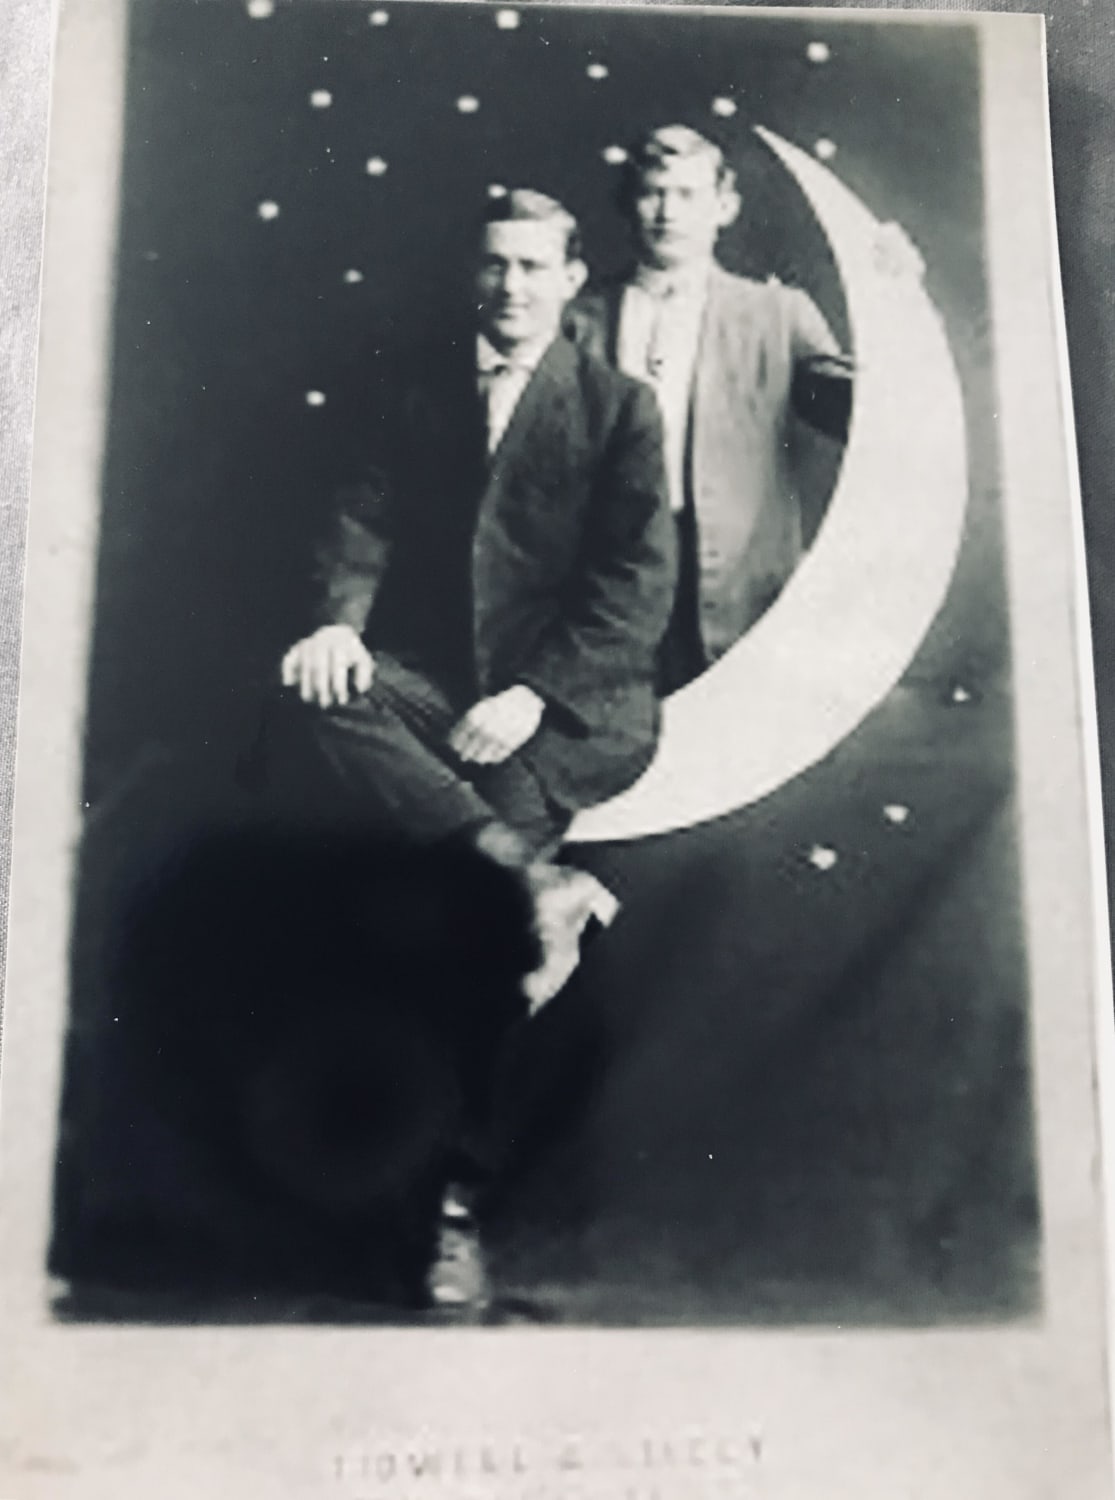 My great uncle and his long time partner (referred to as his “roommate” by the family). Photo dated 1926, Lowell & Sons photography, Atlanta